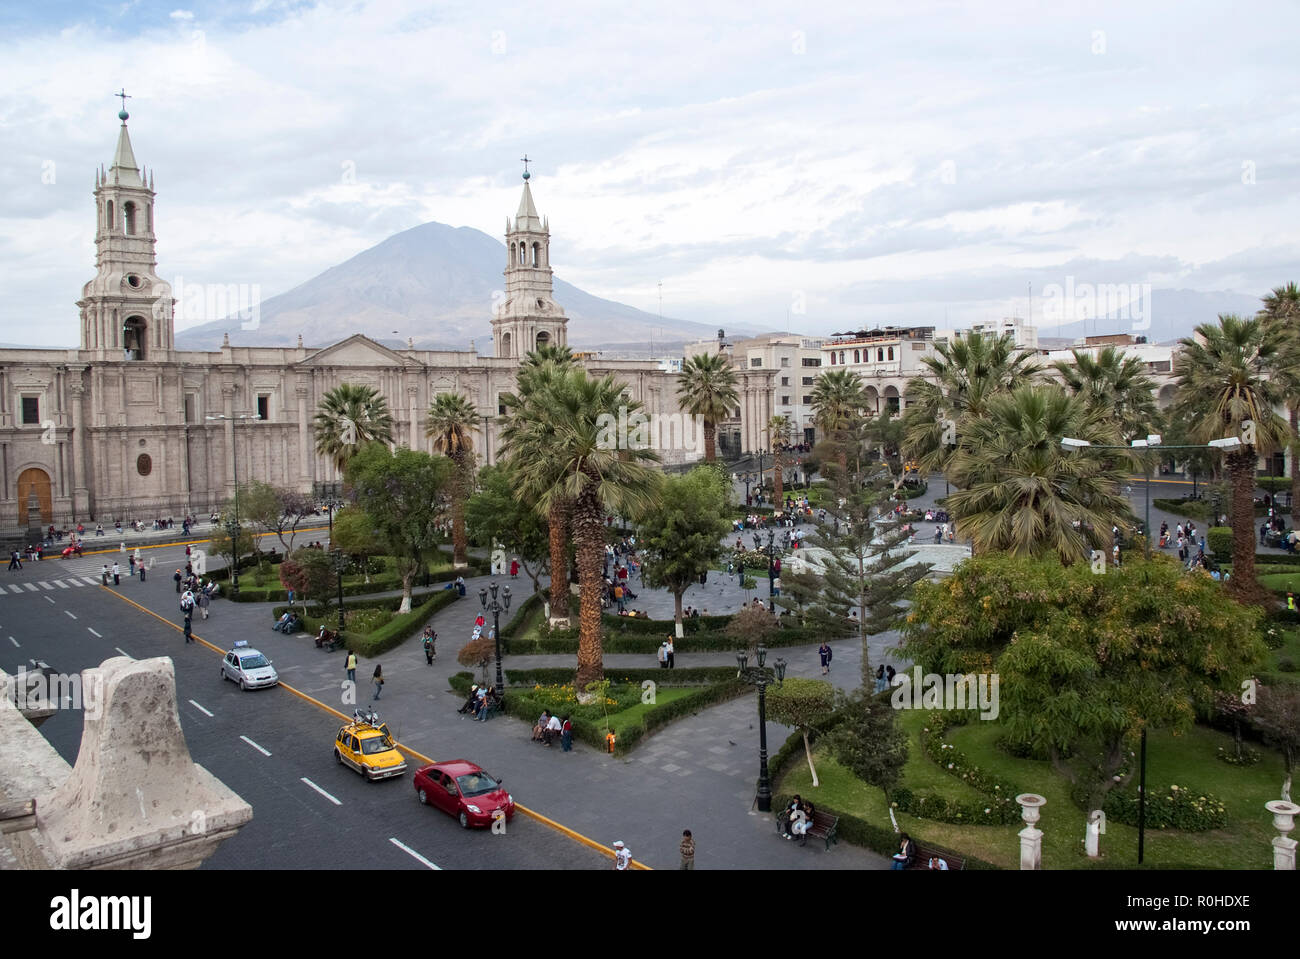 Church and palm trees on Plaza de Armas in Arequipa, Peru, South America Stock Photo